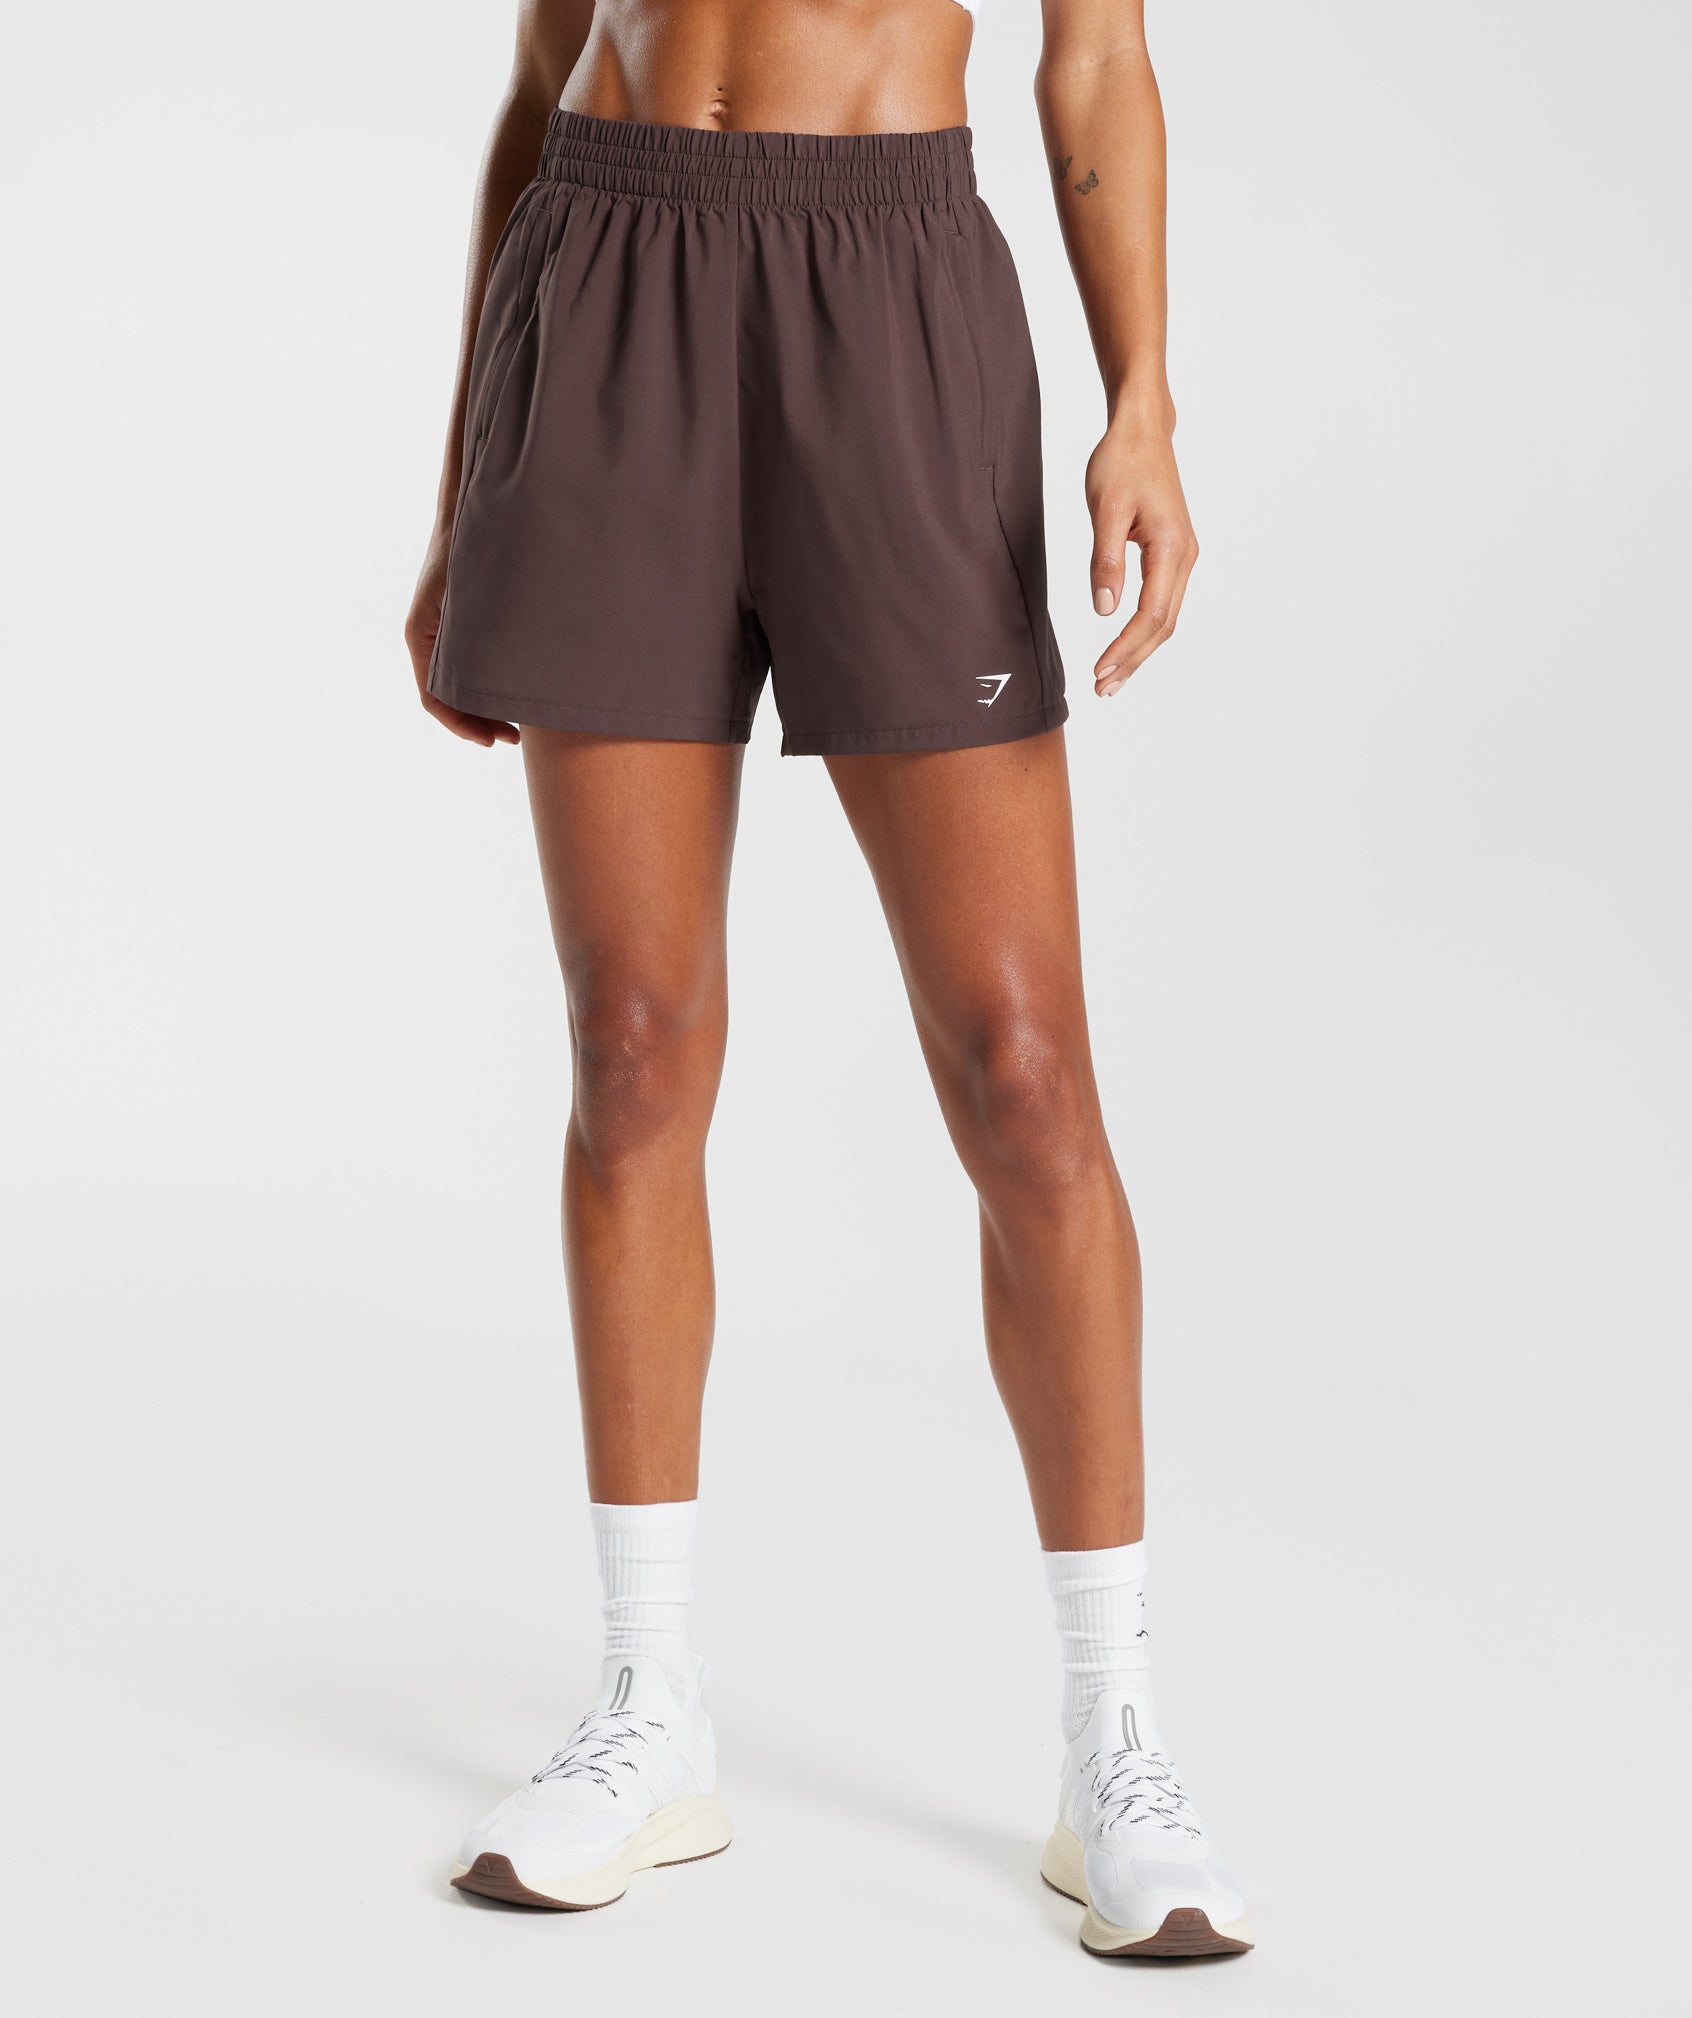 Woven Pocket Shorts in Chocolate Brown